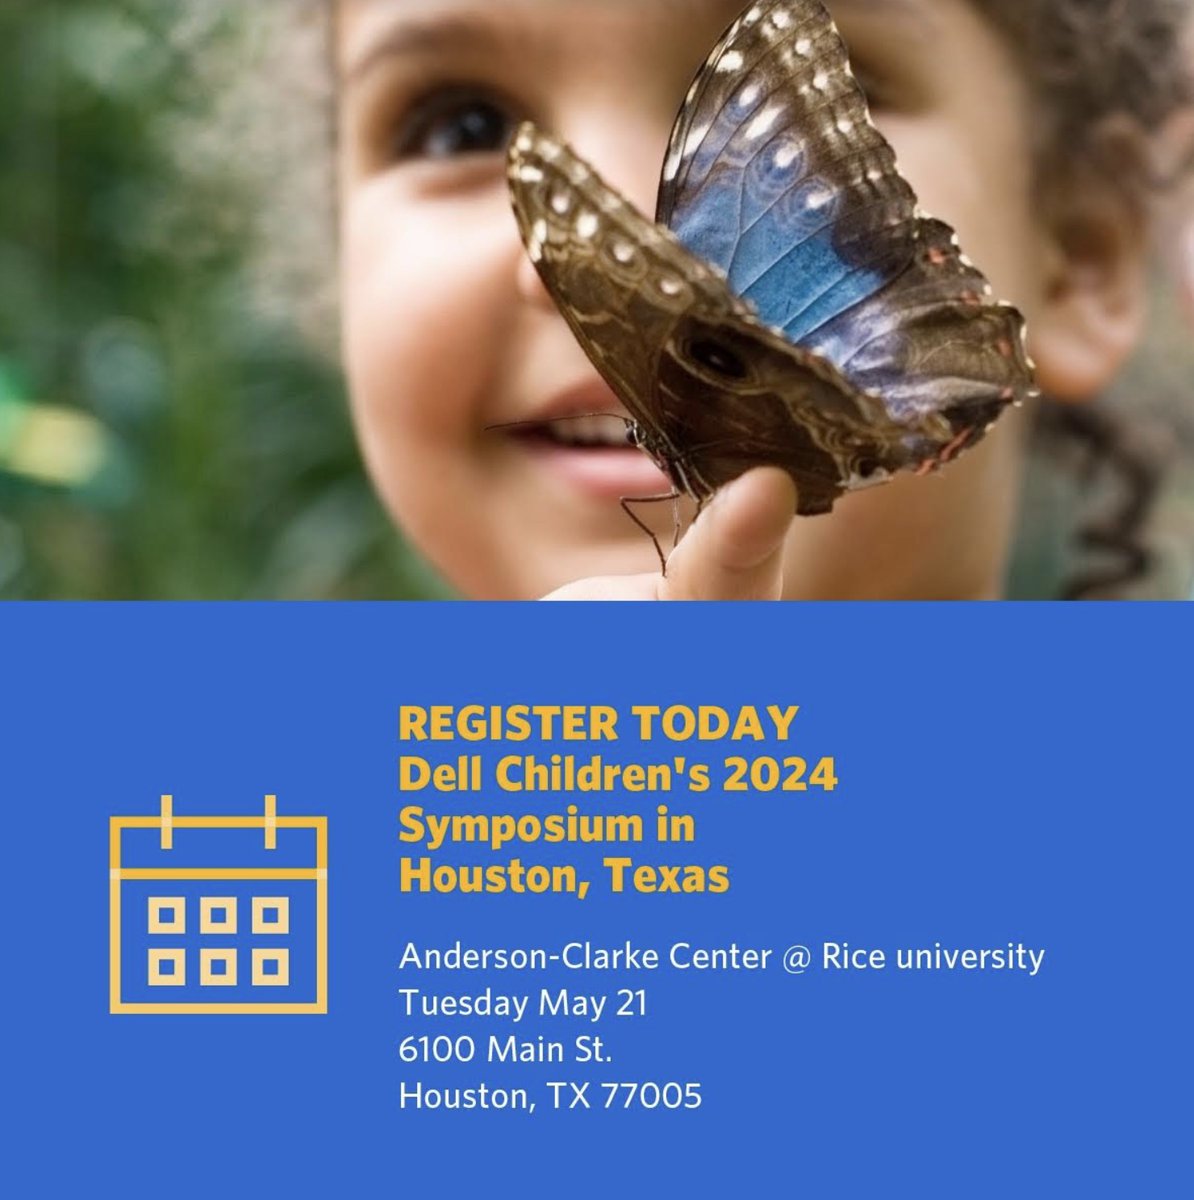 Register Now and join Dell Children's at the 2024 Symposium Growing Excellence in Pediatric Care in Houston, TX to learn more about how our teams deliver the Dell Childrens' Difference everyday! Registration for the event is linked here: ascn.io/6012wELOM